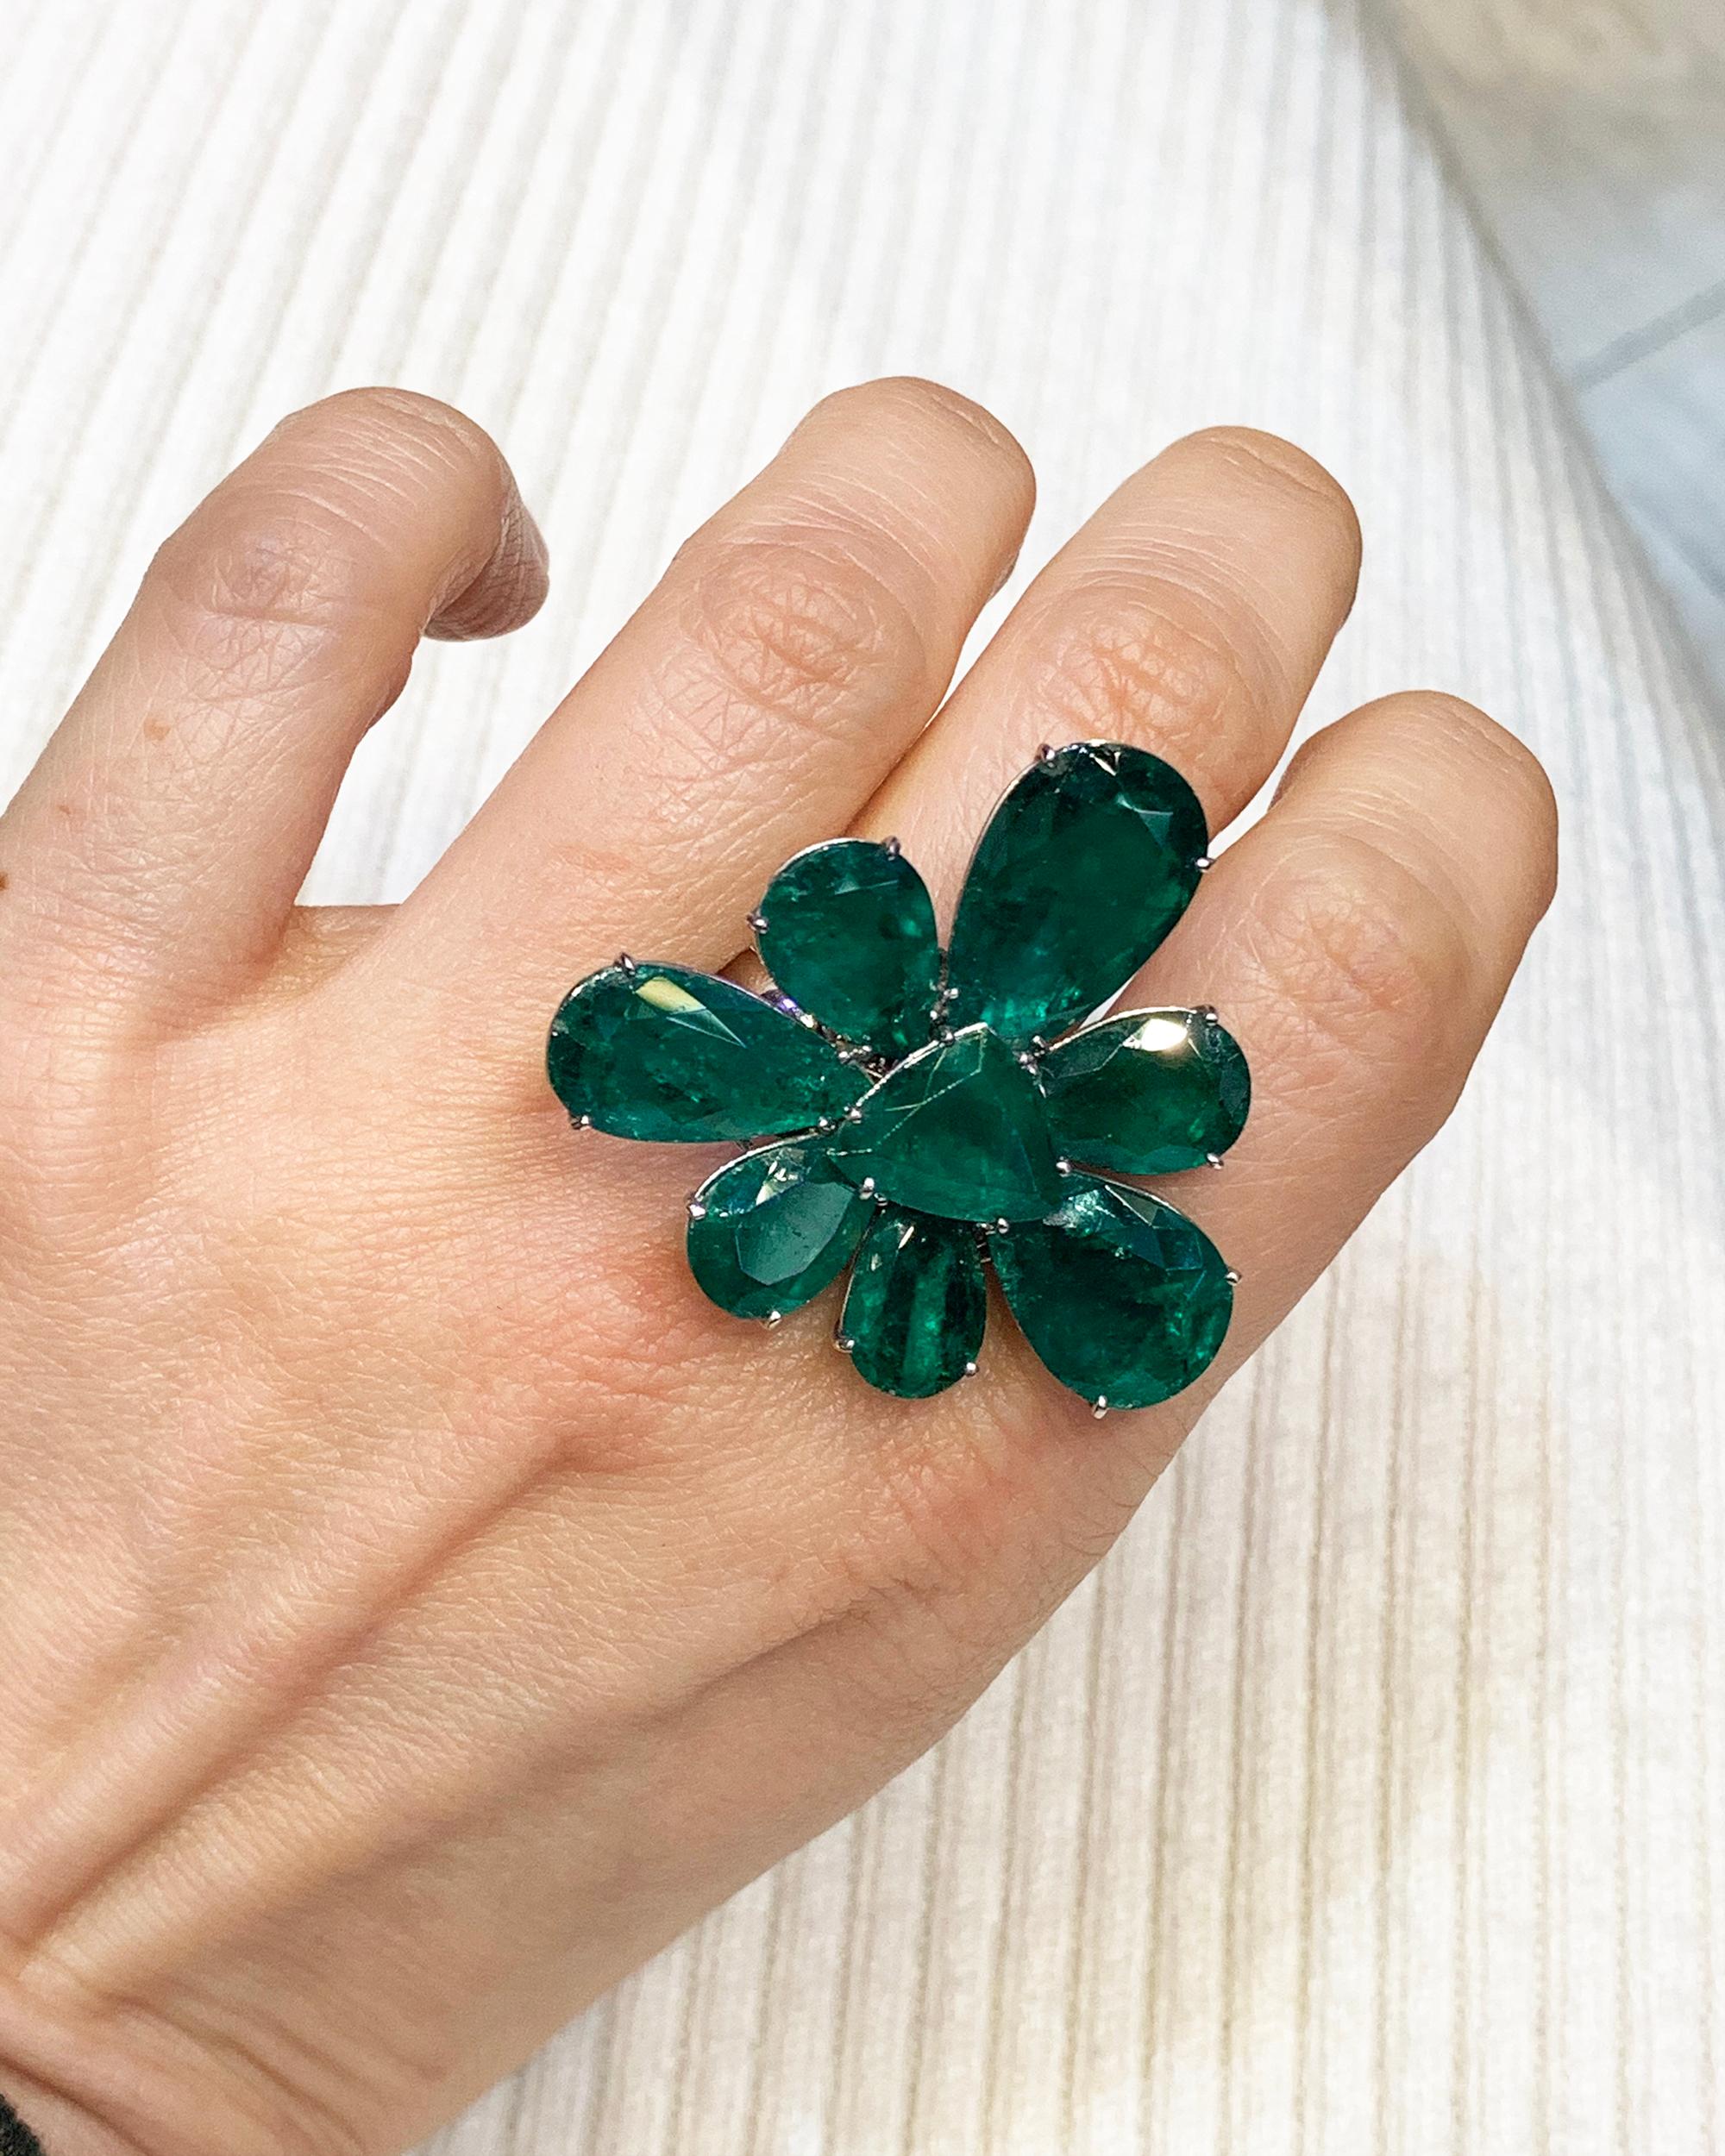 This Spectra Fine Jewelry Colombian Emerald Convertible Flower Ring and Pendant, made in the Contemporary Era, circa 2010s, features 8 emeralds including 7 pear-shape and 1 triangular, weighing approximately 27.09 carats total. The 7 pear shape